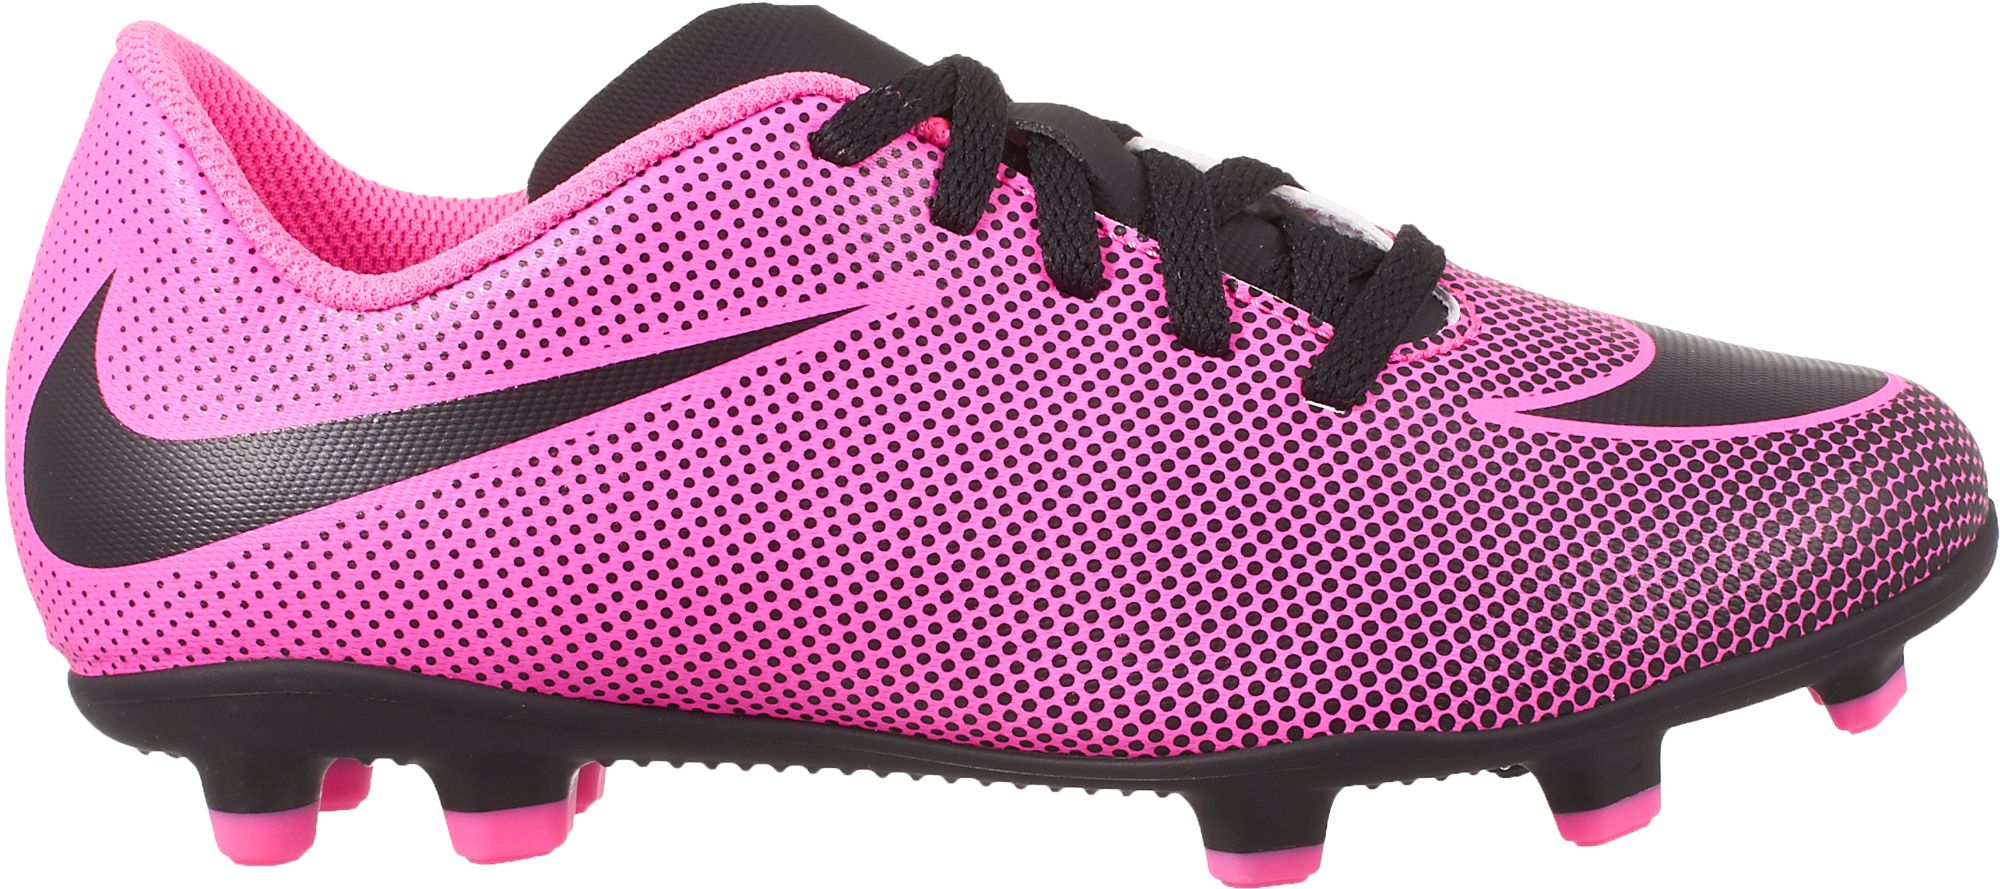 toddler nike soccer cleats